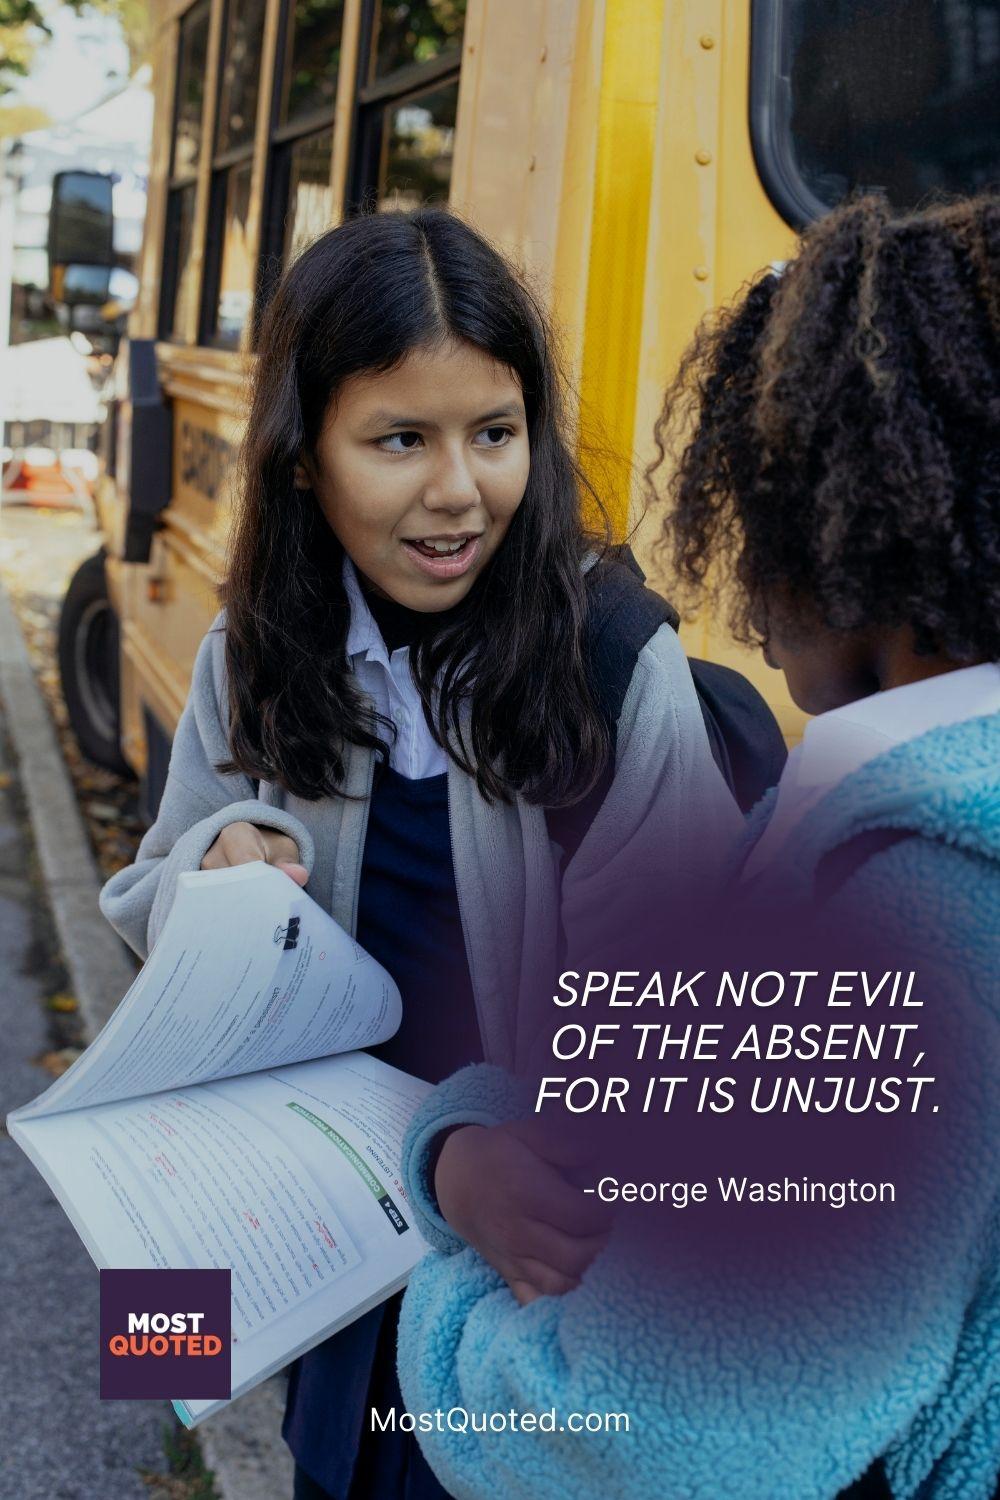 Speak not evil of the absent, for it is unjust. - George Washington